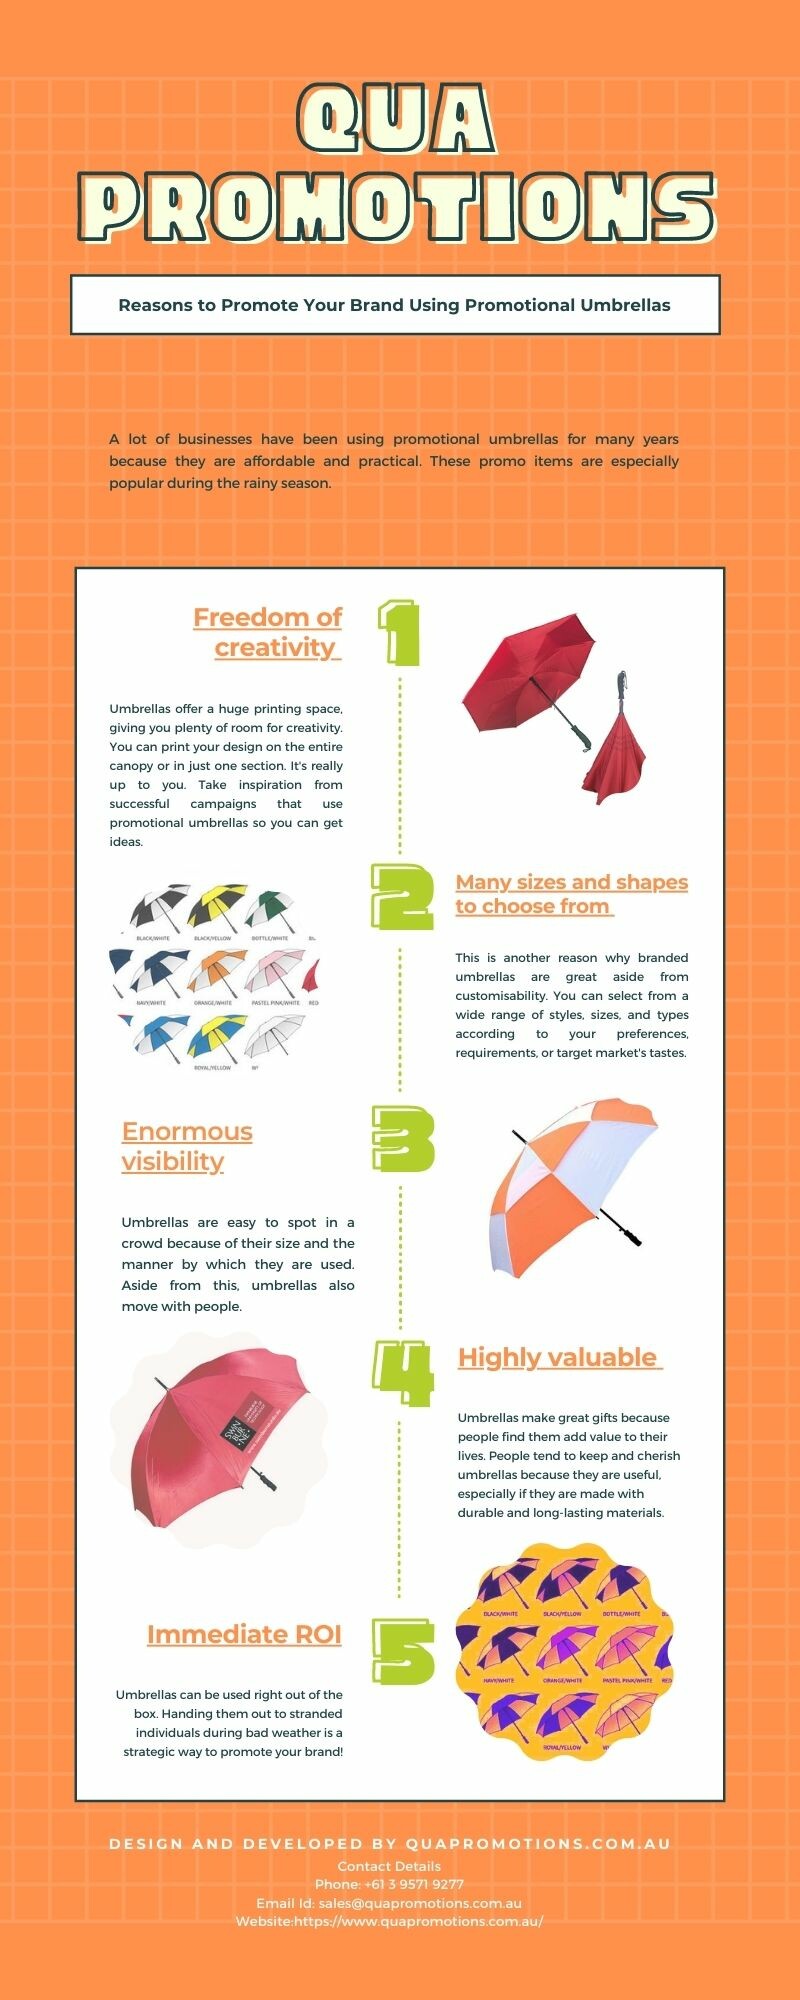 Reasons to Promote Your Brand Using Promotional Umbrellas